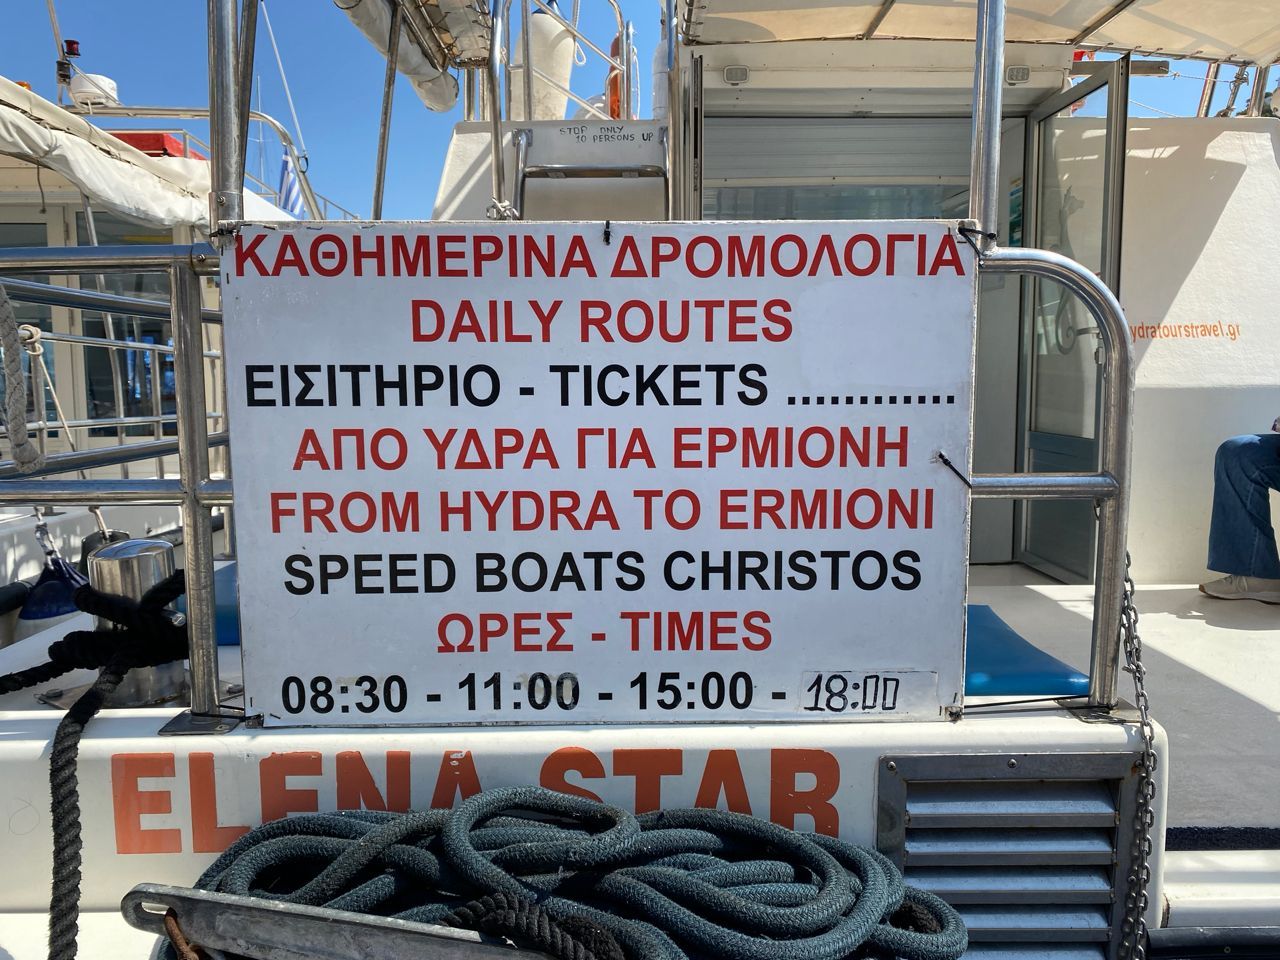 Hydra to Ermioni timetable for the Christos Passenger Ferry as of 4 June 2023